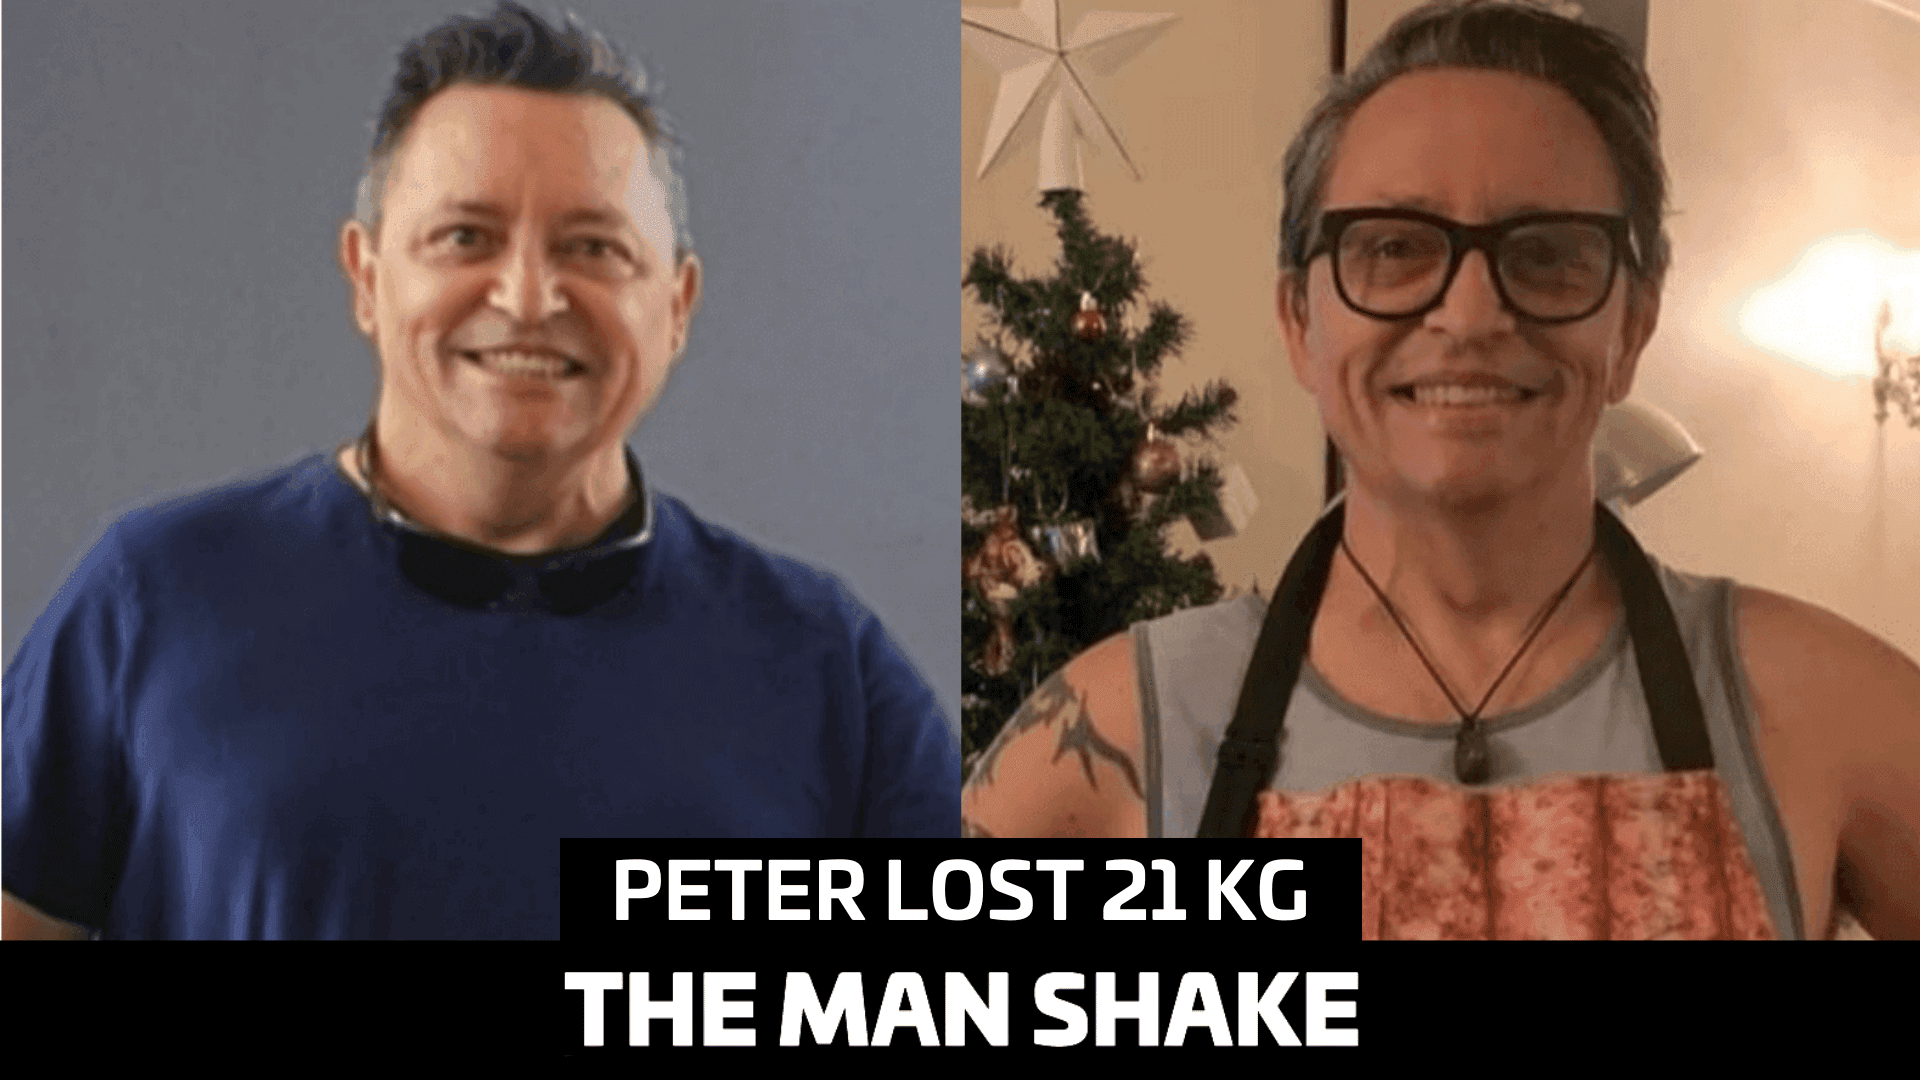 Peter is living life from losing 21kg!